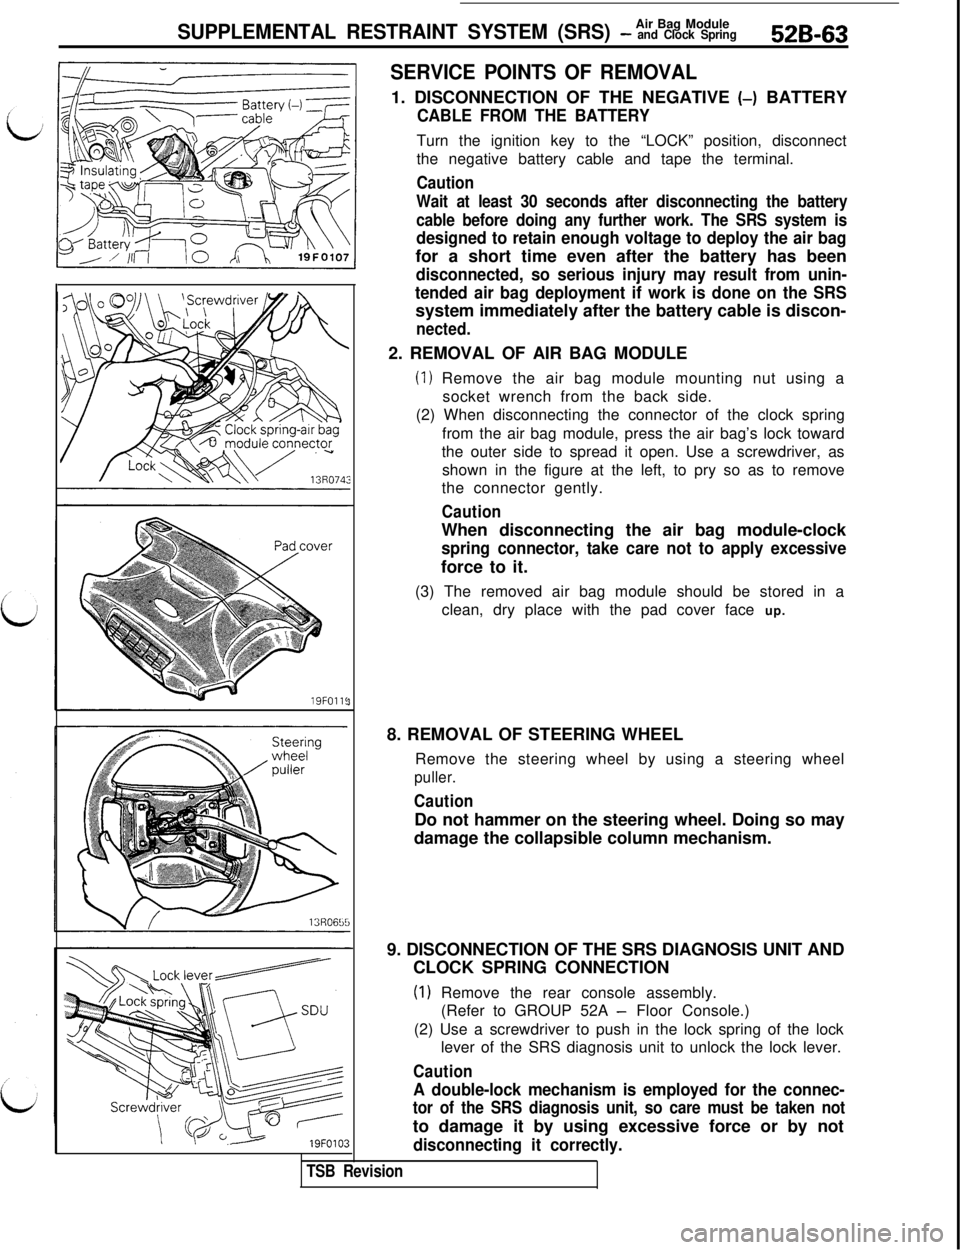 MITSUBISHI 3000GT 1991 Owners Manual Air Bag ModuleSUPPLEMENTAL RESTRAINT SYSTEM (SRS) - and Clock Spring526-6319FOlll
3
SERVICE POINTS OF REMOVAL1. DISCONNECTION OF THE NEGATIVE (-) BATTERY
CABLE FROM THE BATTERYTurn the ignition key to